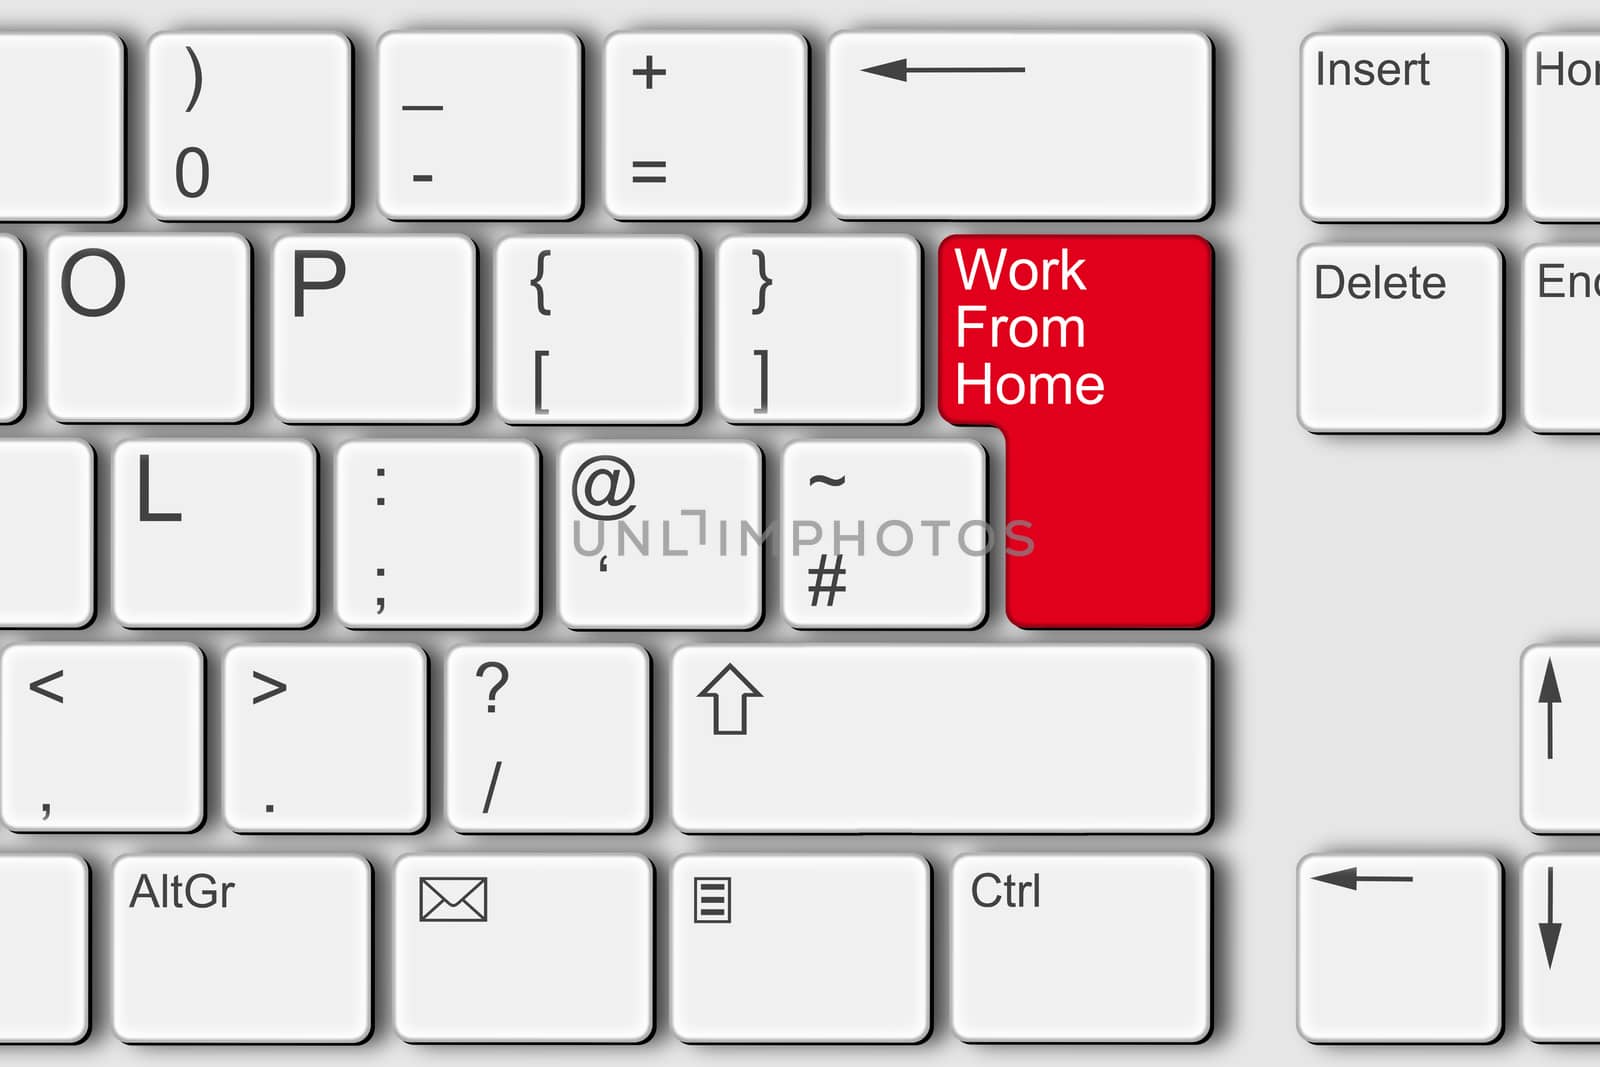 A work from home concept PC computer keyboard illustration red